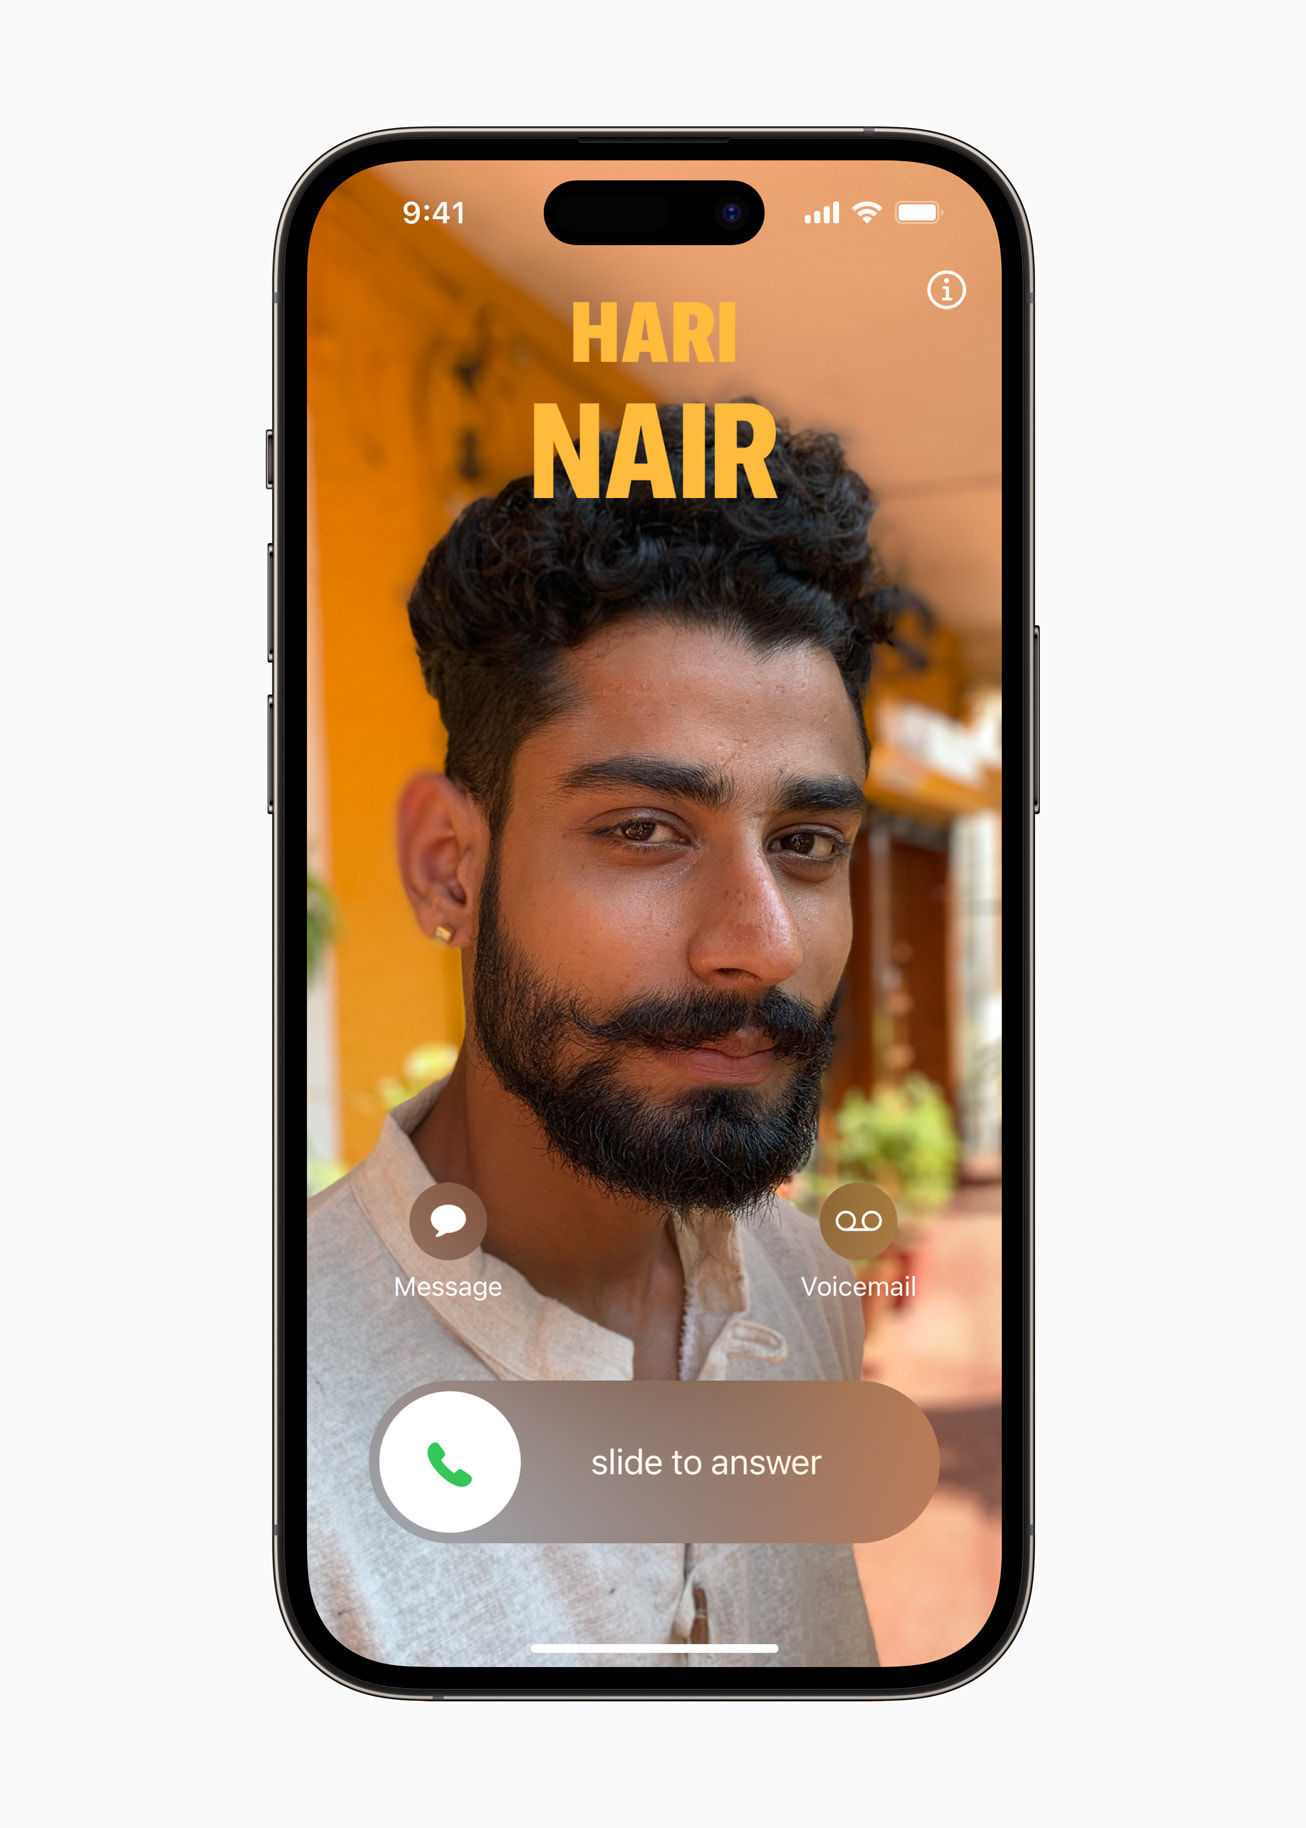 Personalized Contact Cards on iOS 17